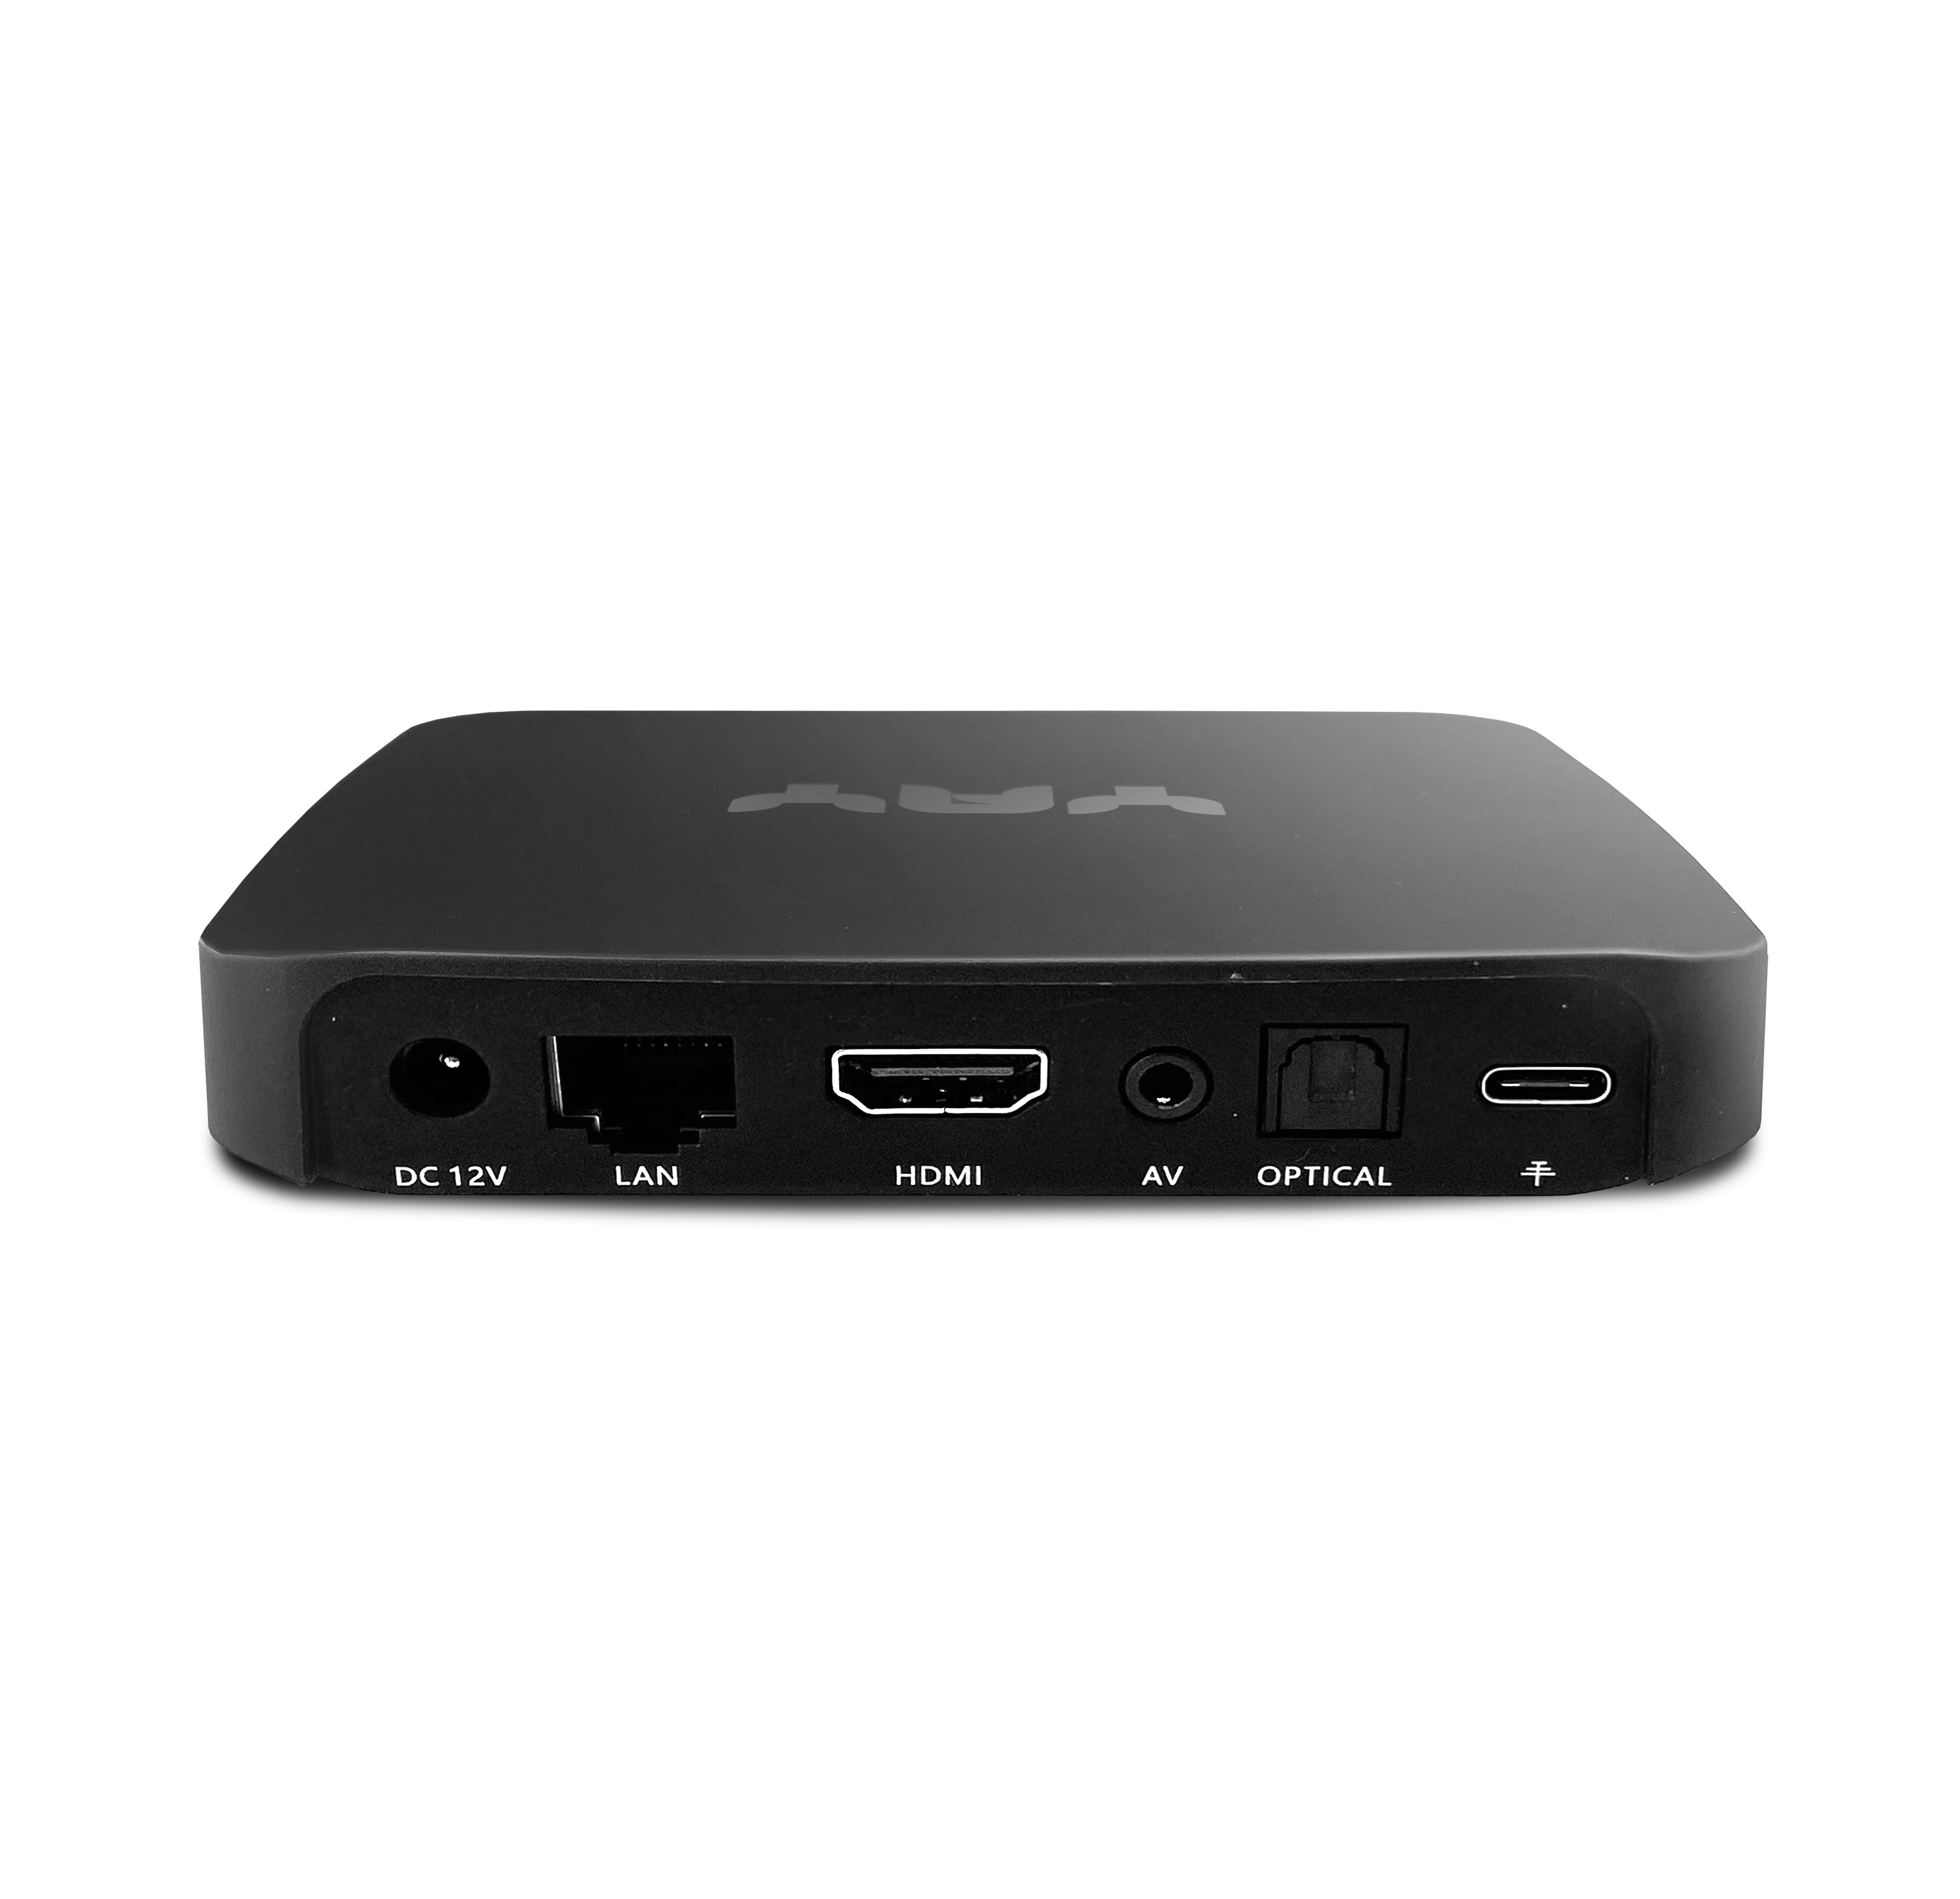 YAY GO Android TV HIGH-END 4K UHD Streaming Box Android 10.0 und Chromecast integriert